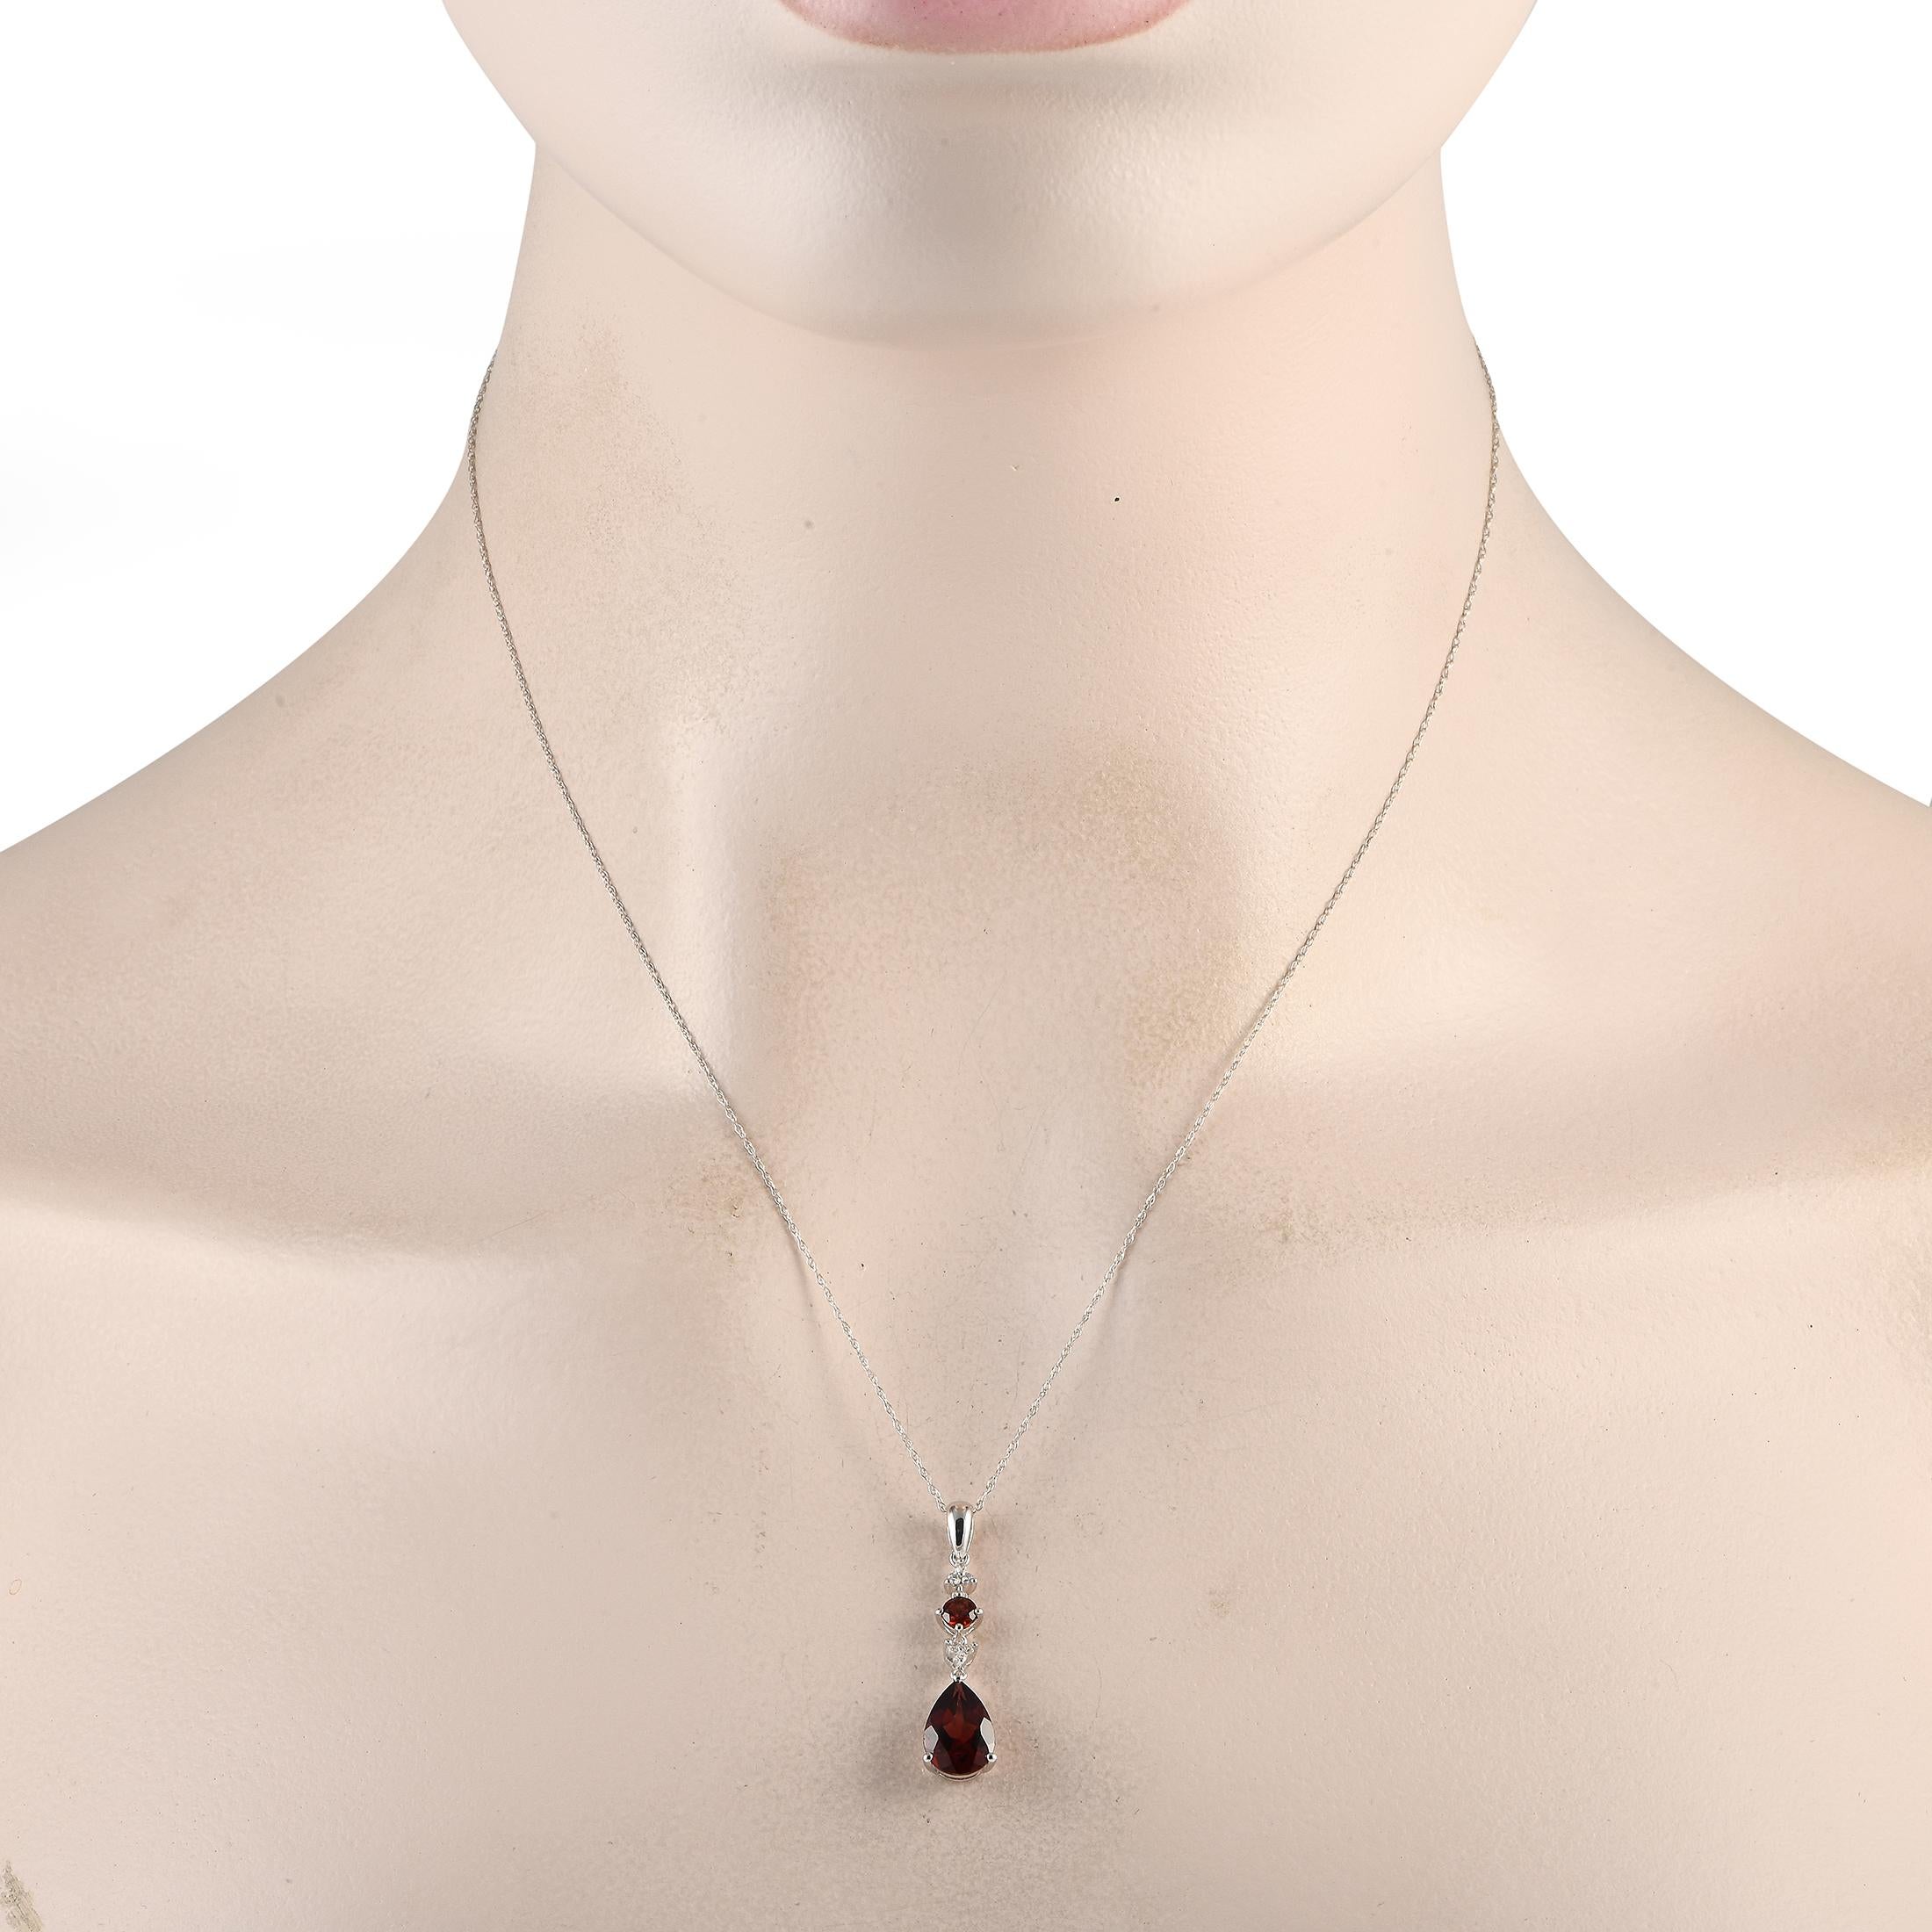 Add a stylish pop of color to any ensemble with this impeccably crafted necklace. Ideal for any occasion, this sophisticated accessory features a 14K white gold pendant measuring 1.25 long by 0.25 wide suspended from an 18 chain. It also includes